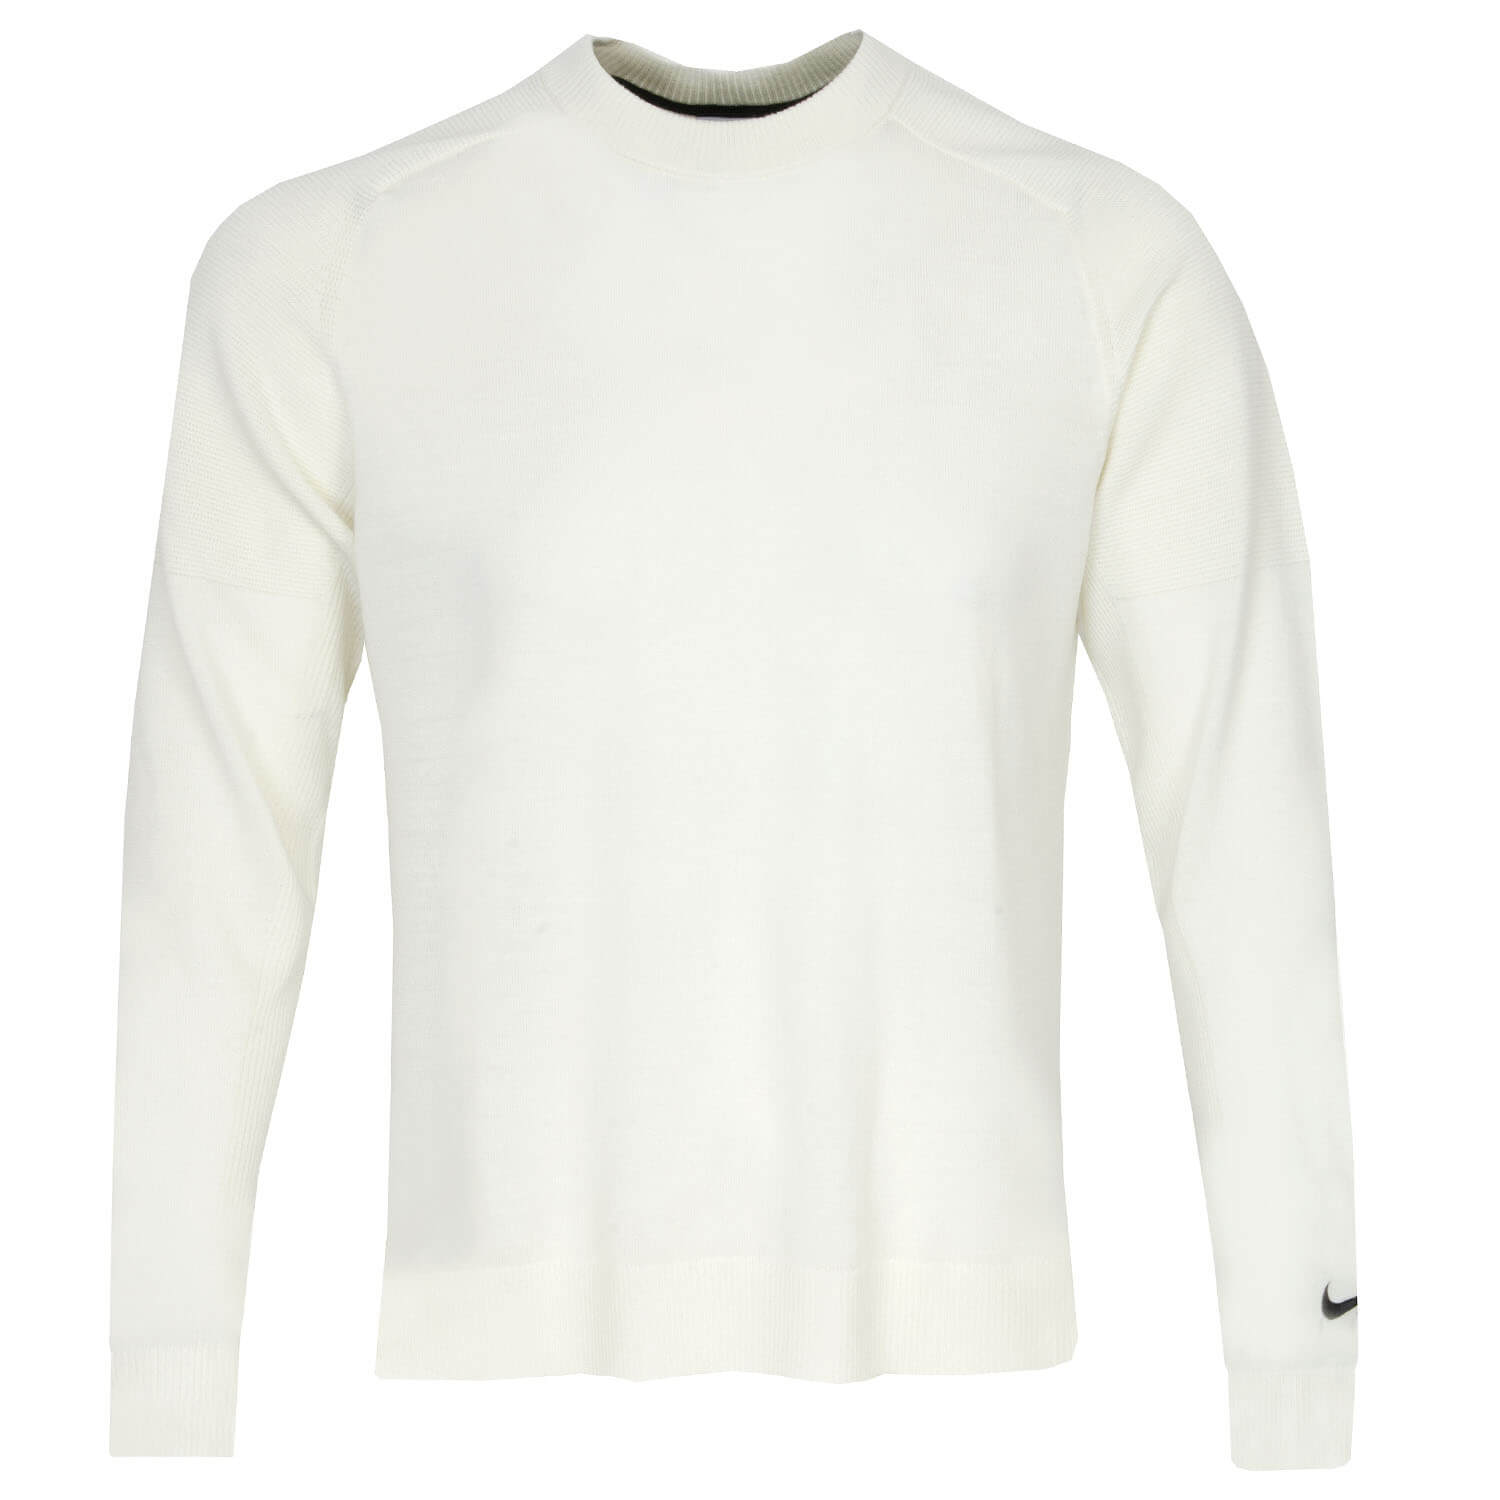 Nike Tiger Woods Knit Crew Neck Golf Sweater